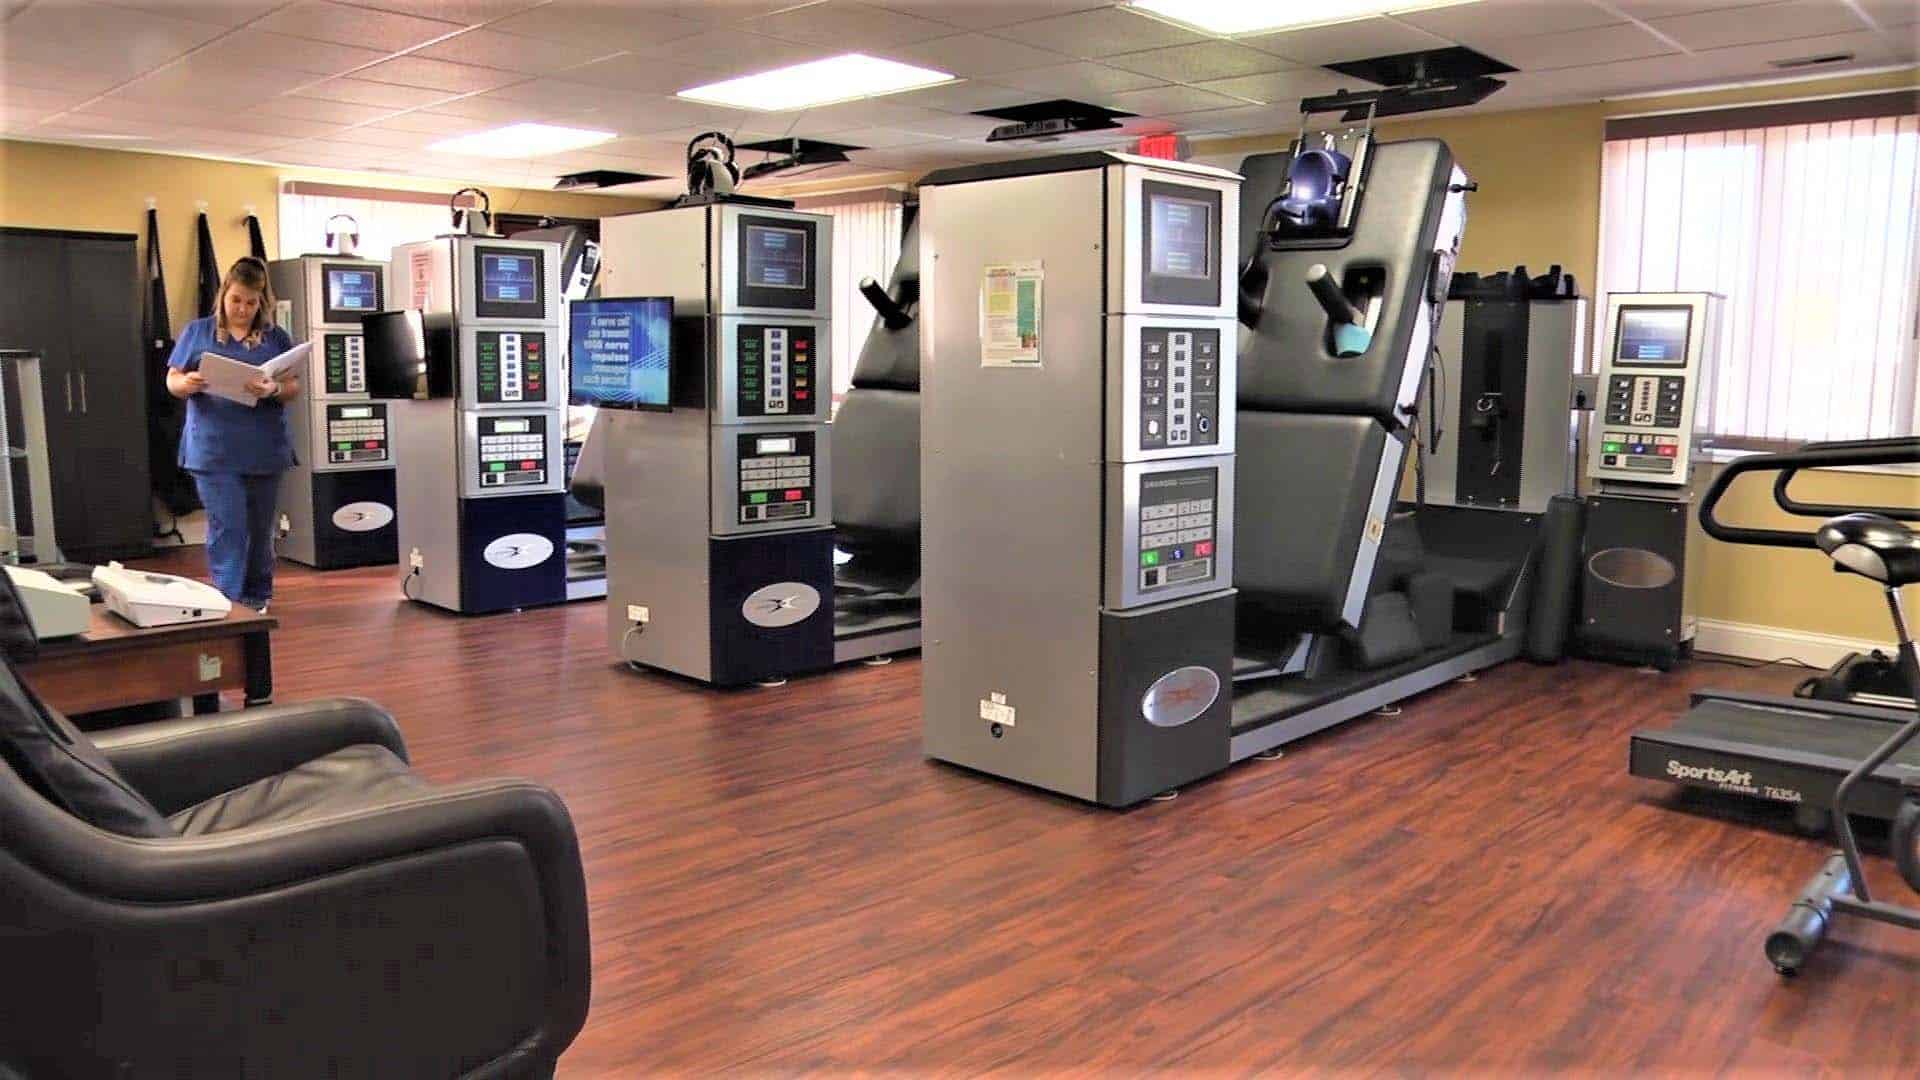 A gym room with treadmills and exercise machines.